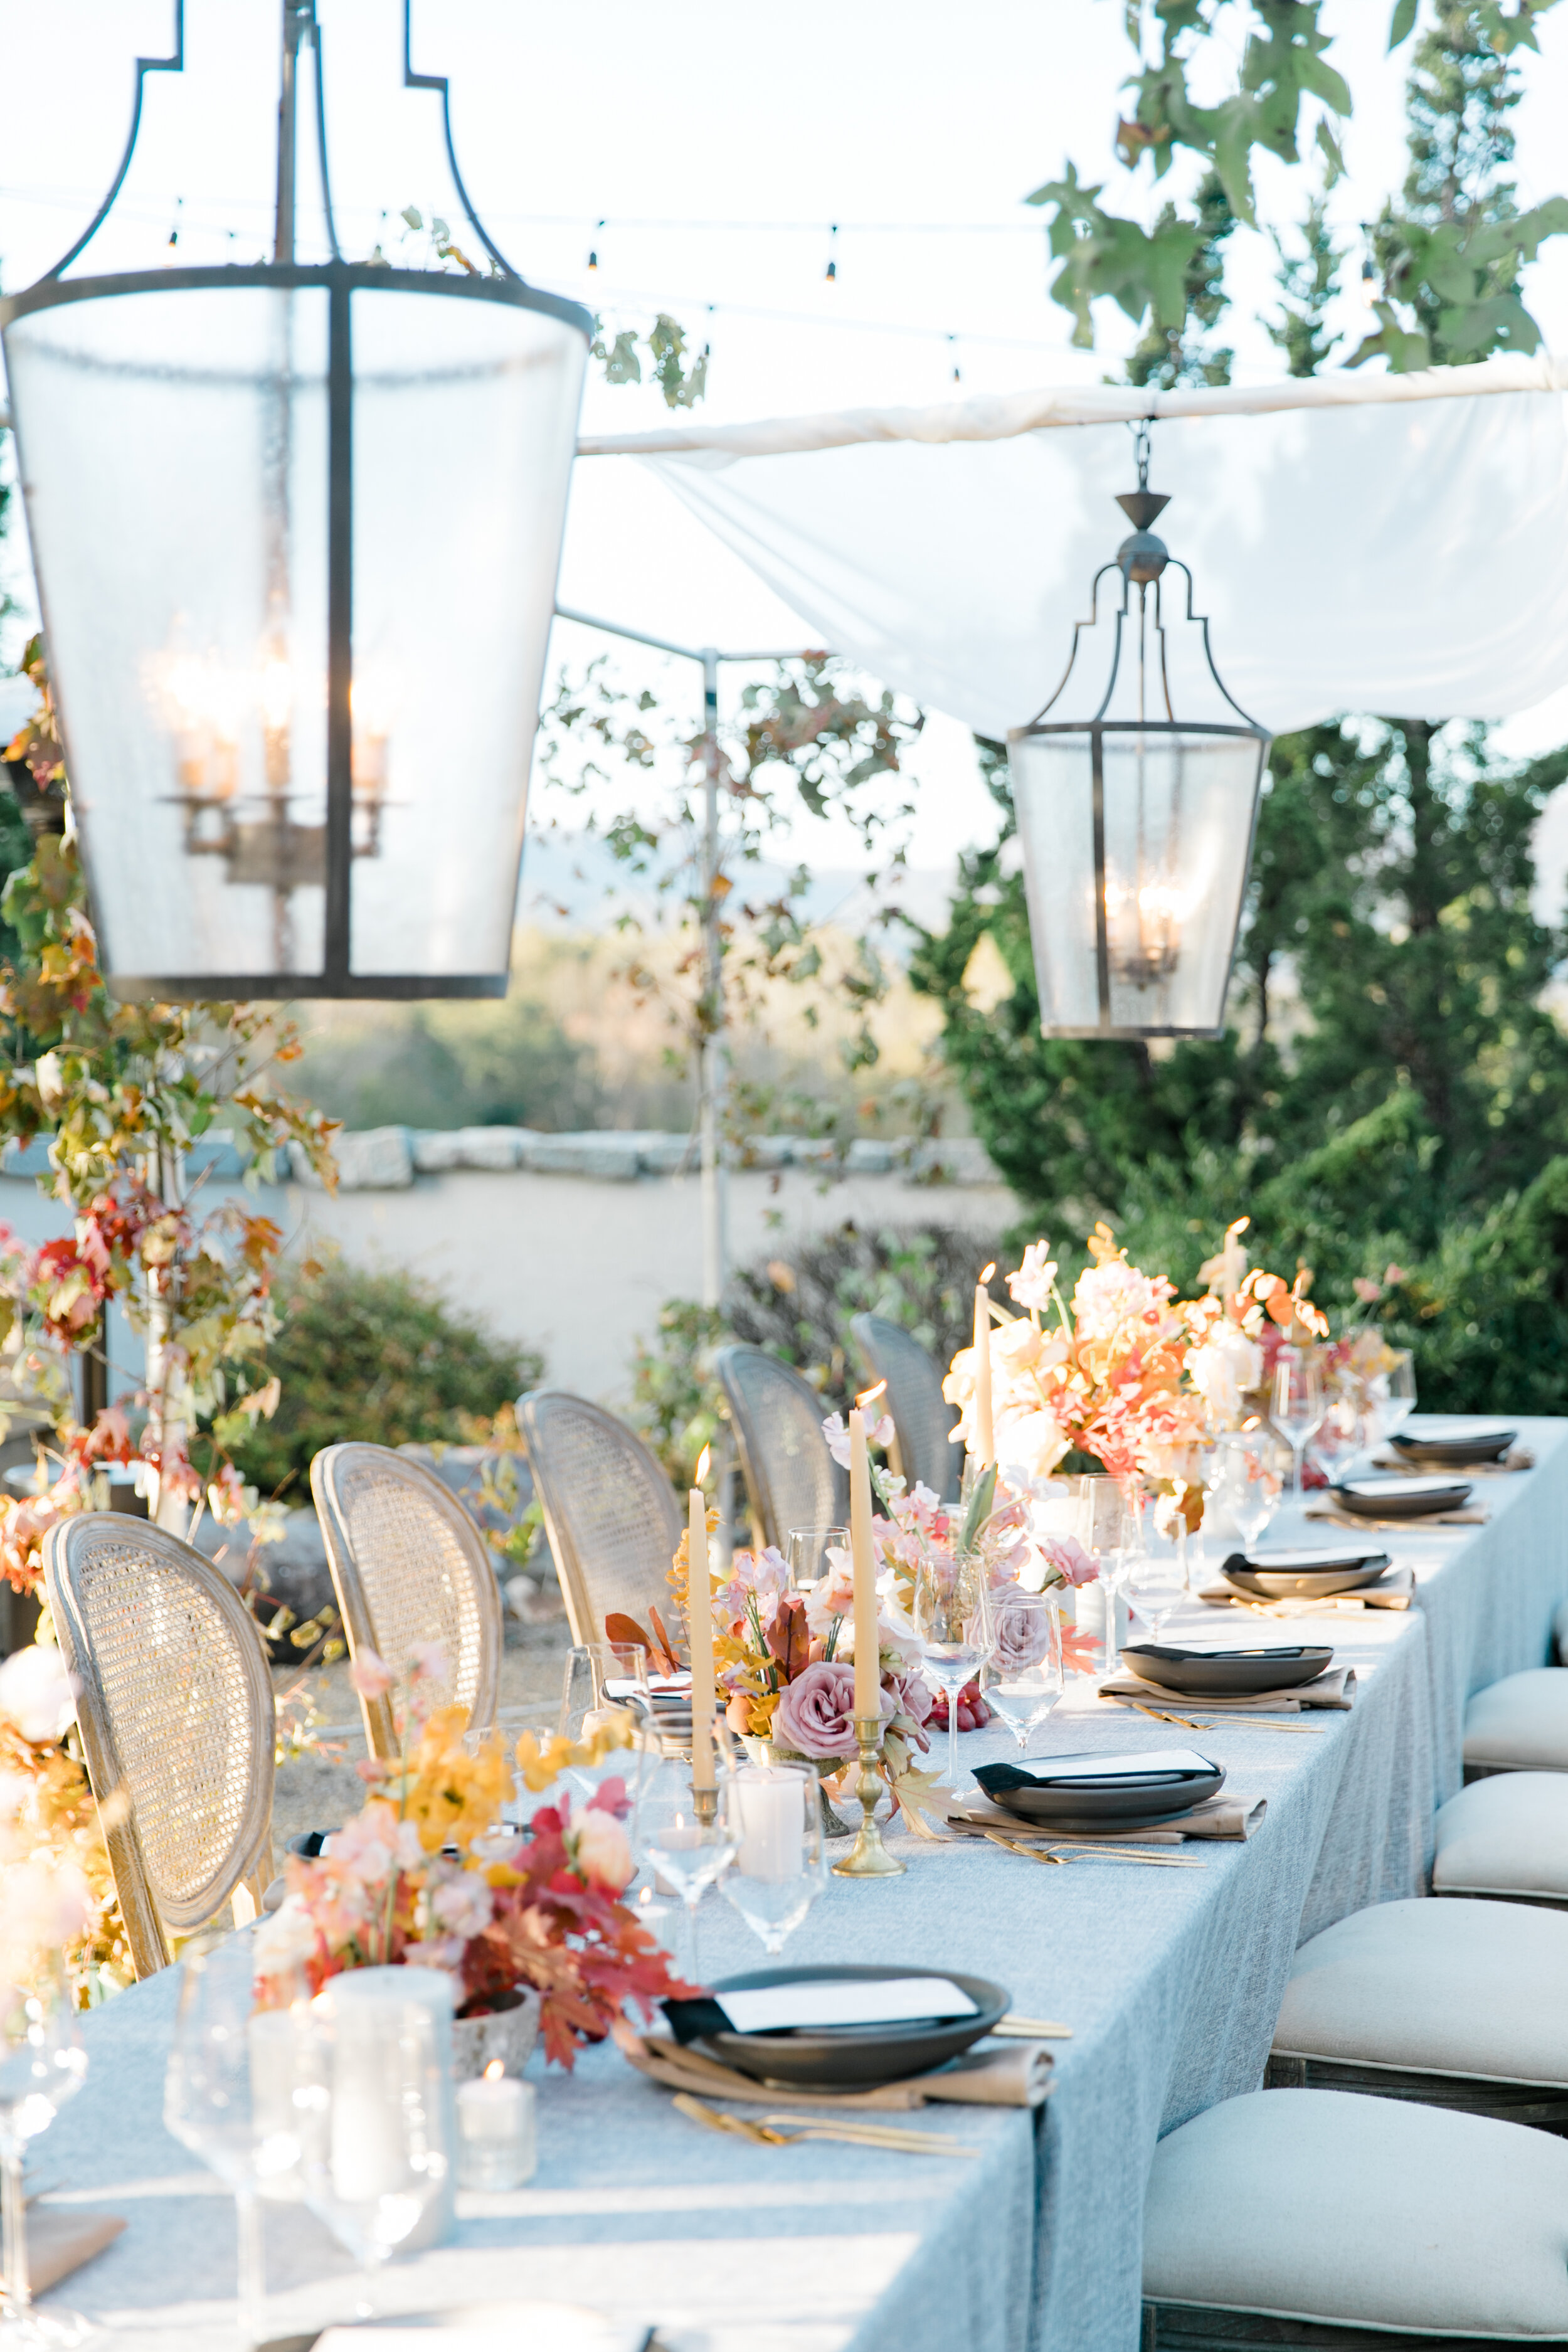 Romantic and Whimsical Wedding Reception Dinner Table